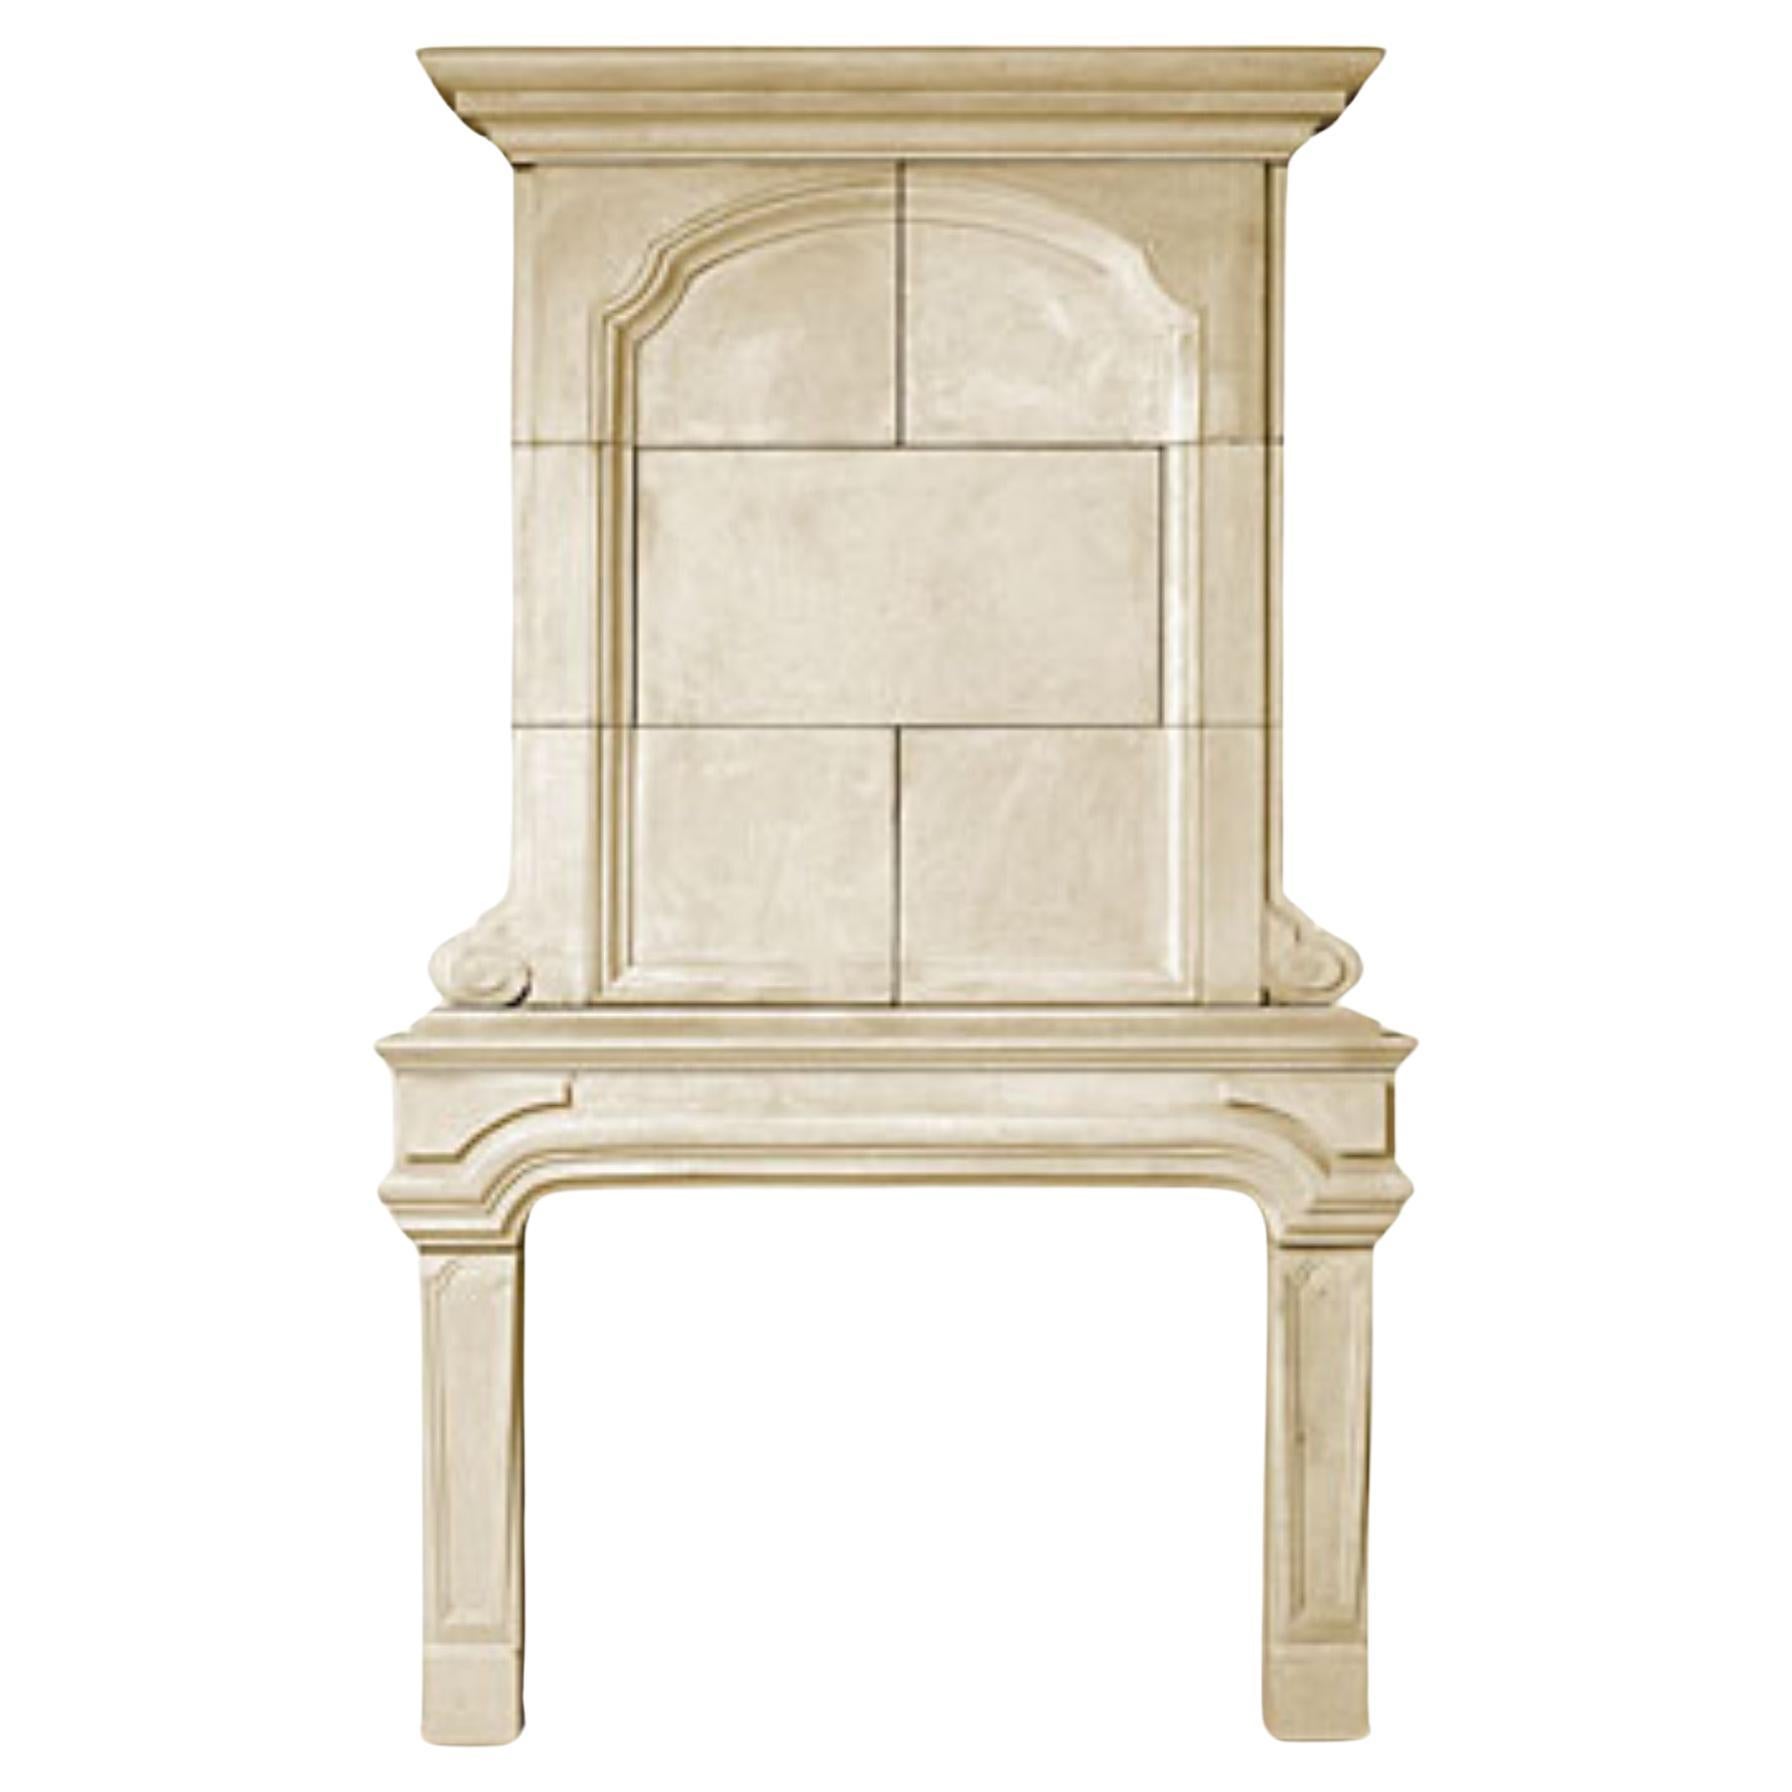 The Regency: A Classically-Inspired English Stone Fireplace with Overmantel 